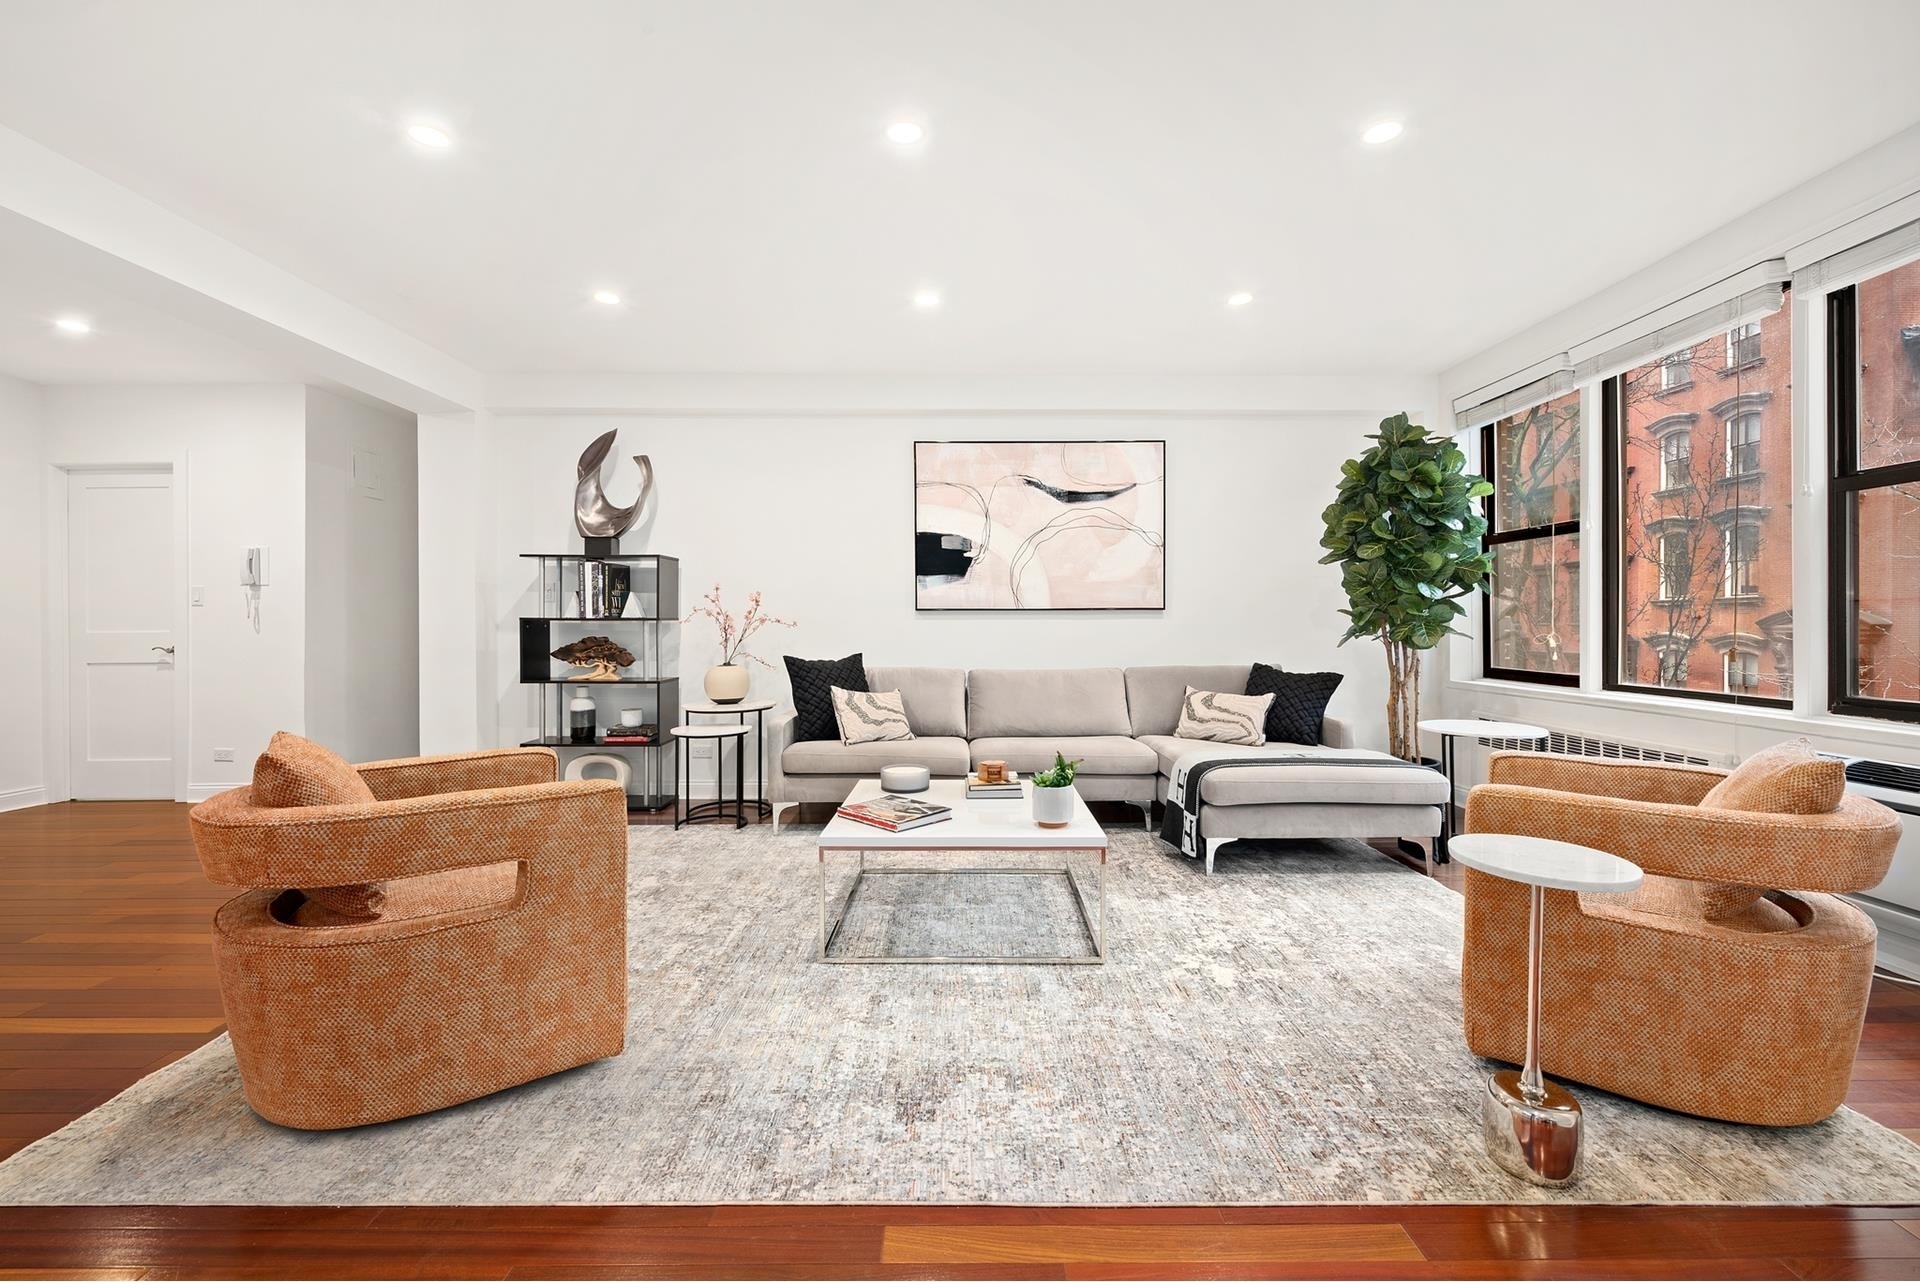 Co-op Properties for Sale at 211 E 18TH ST, 2R Gramercy Park, New York, New York 10003